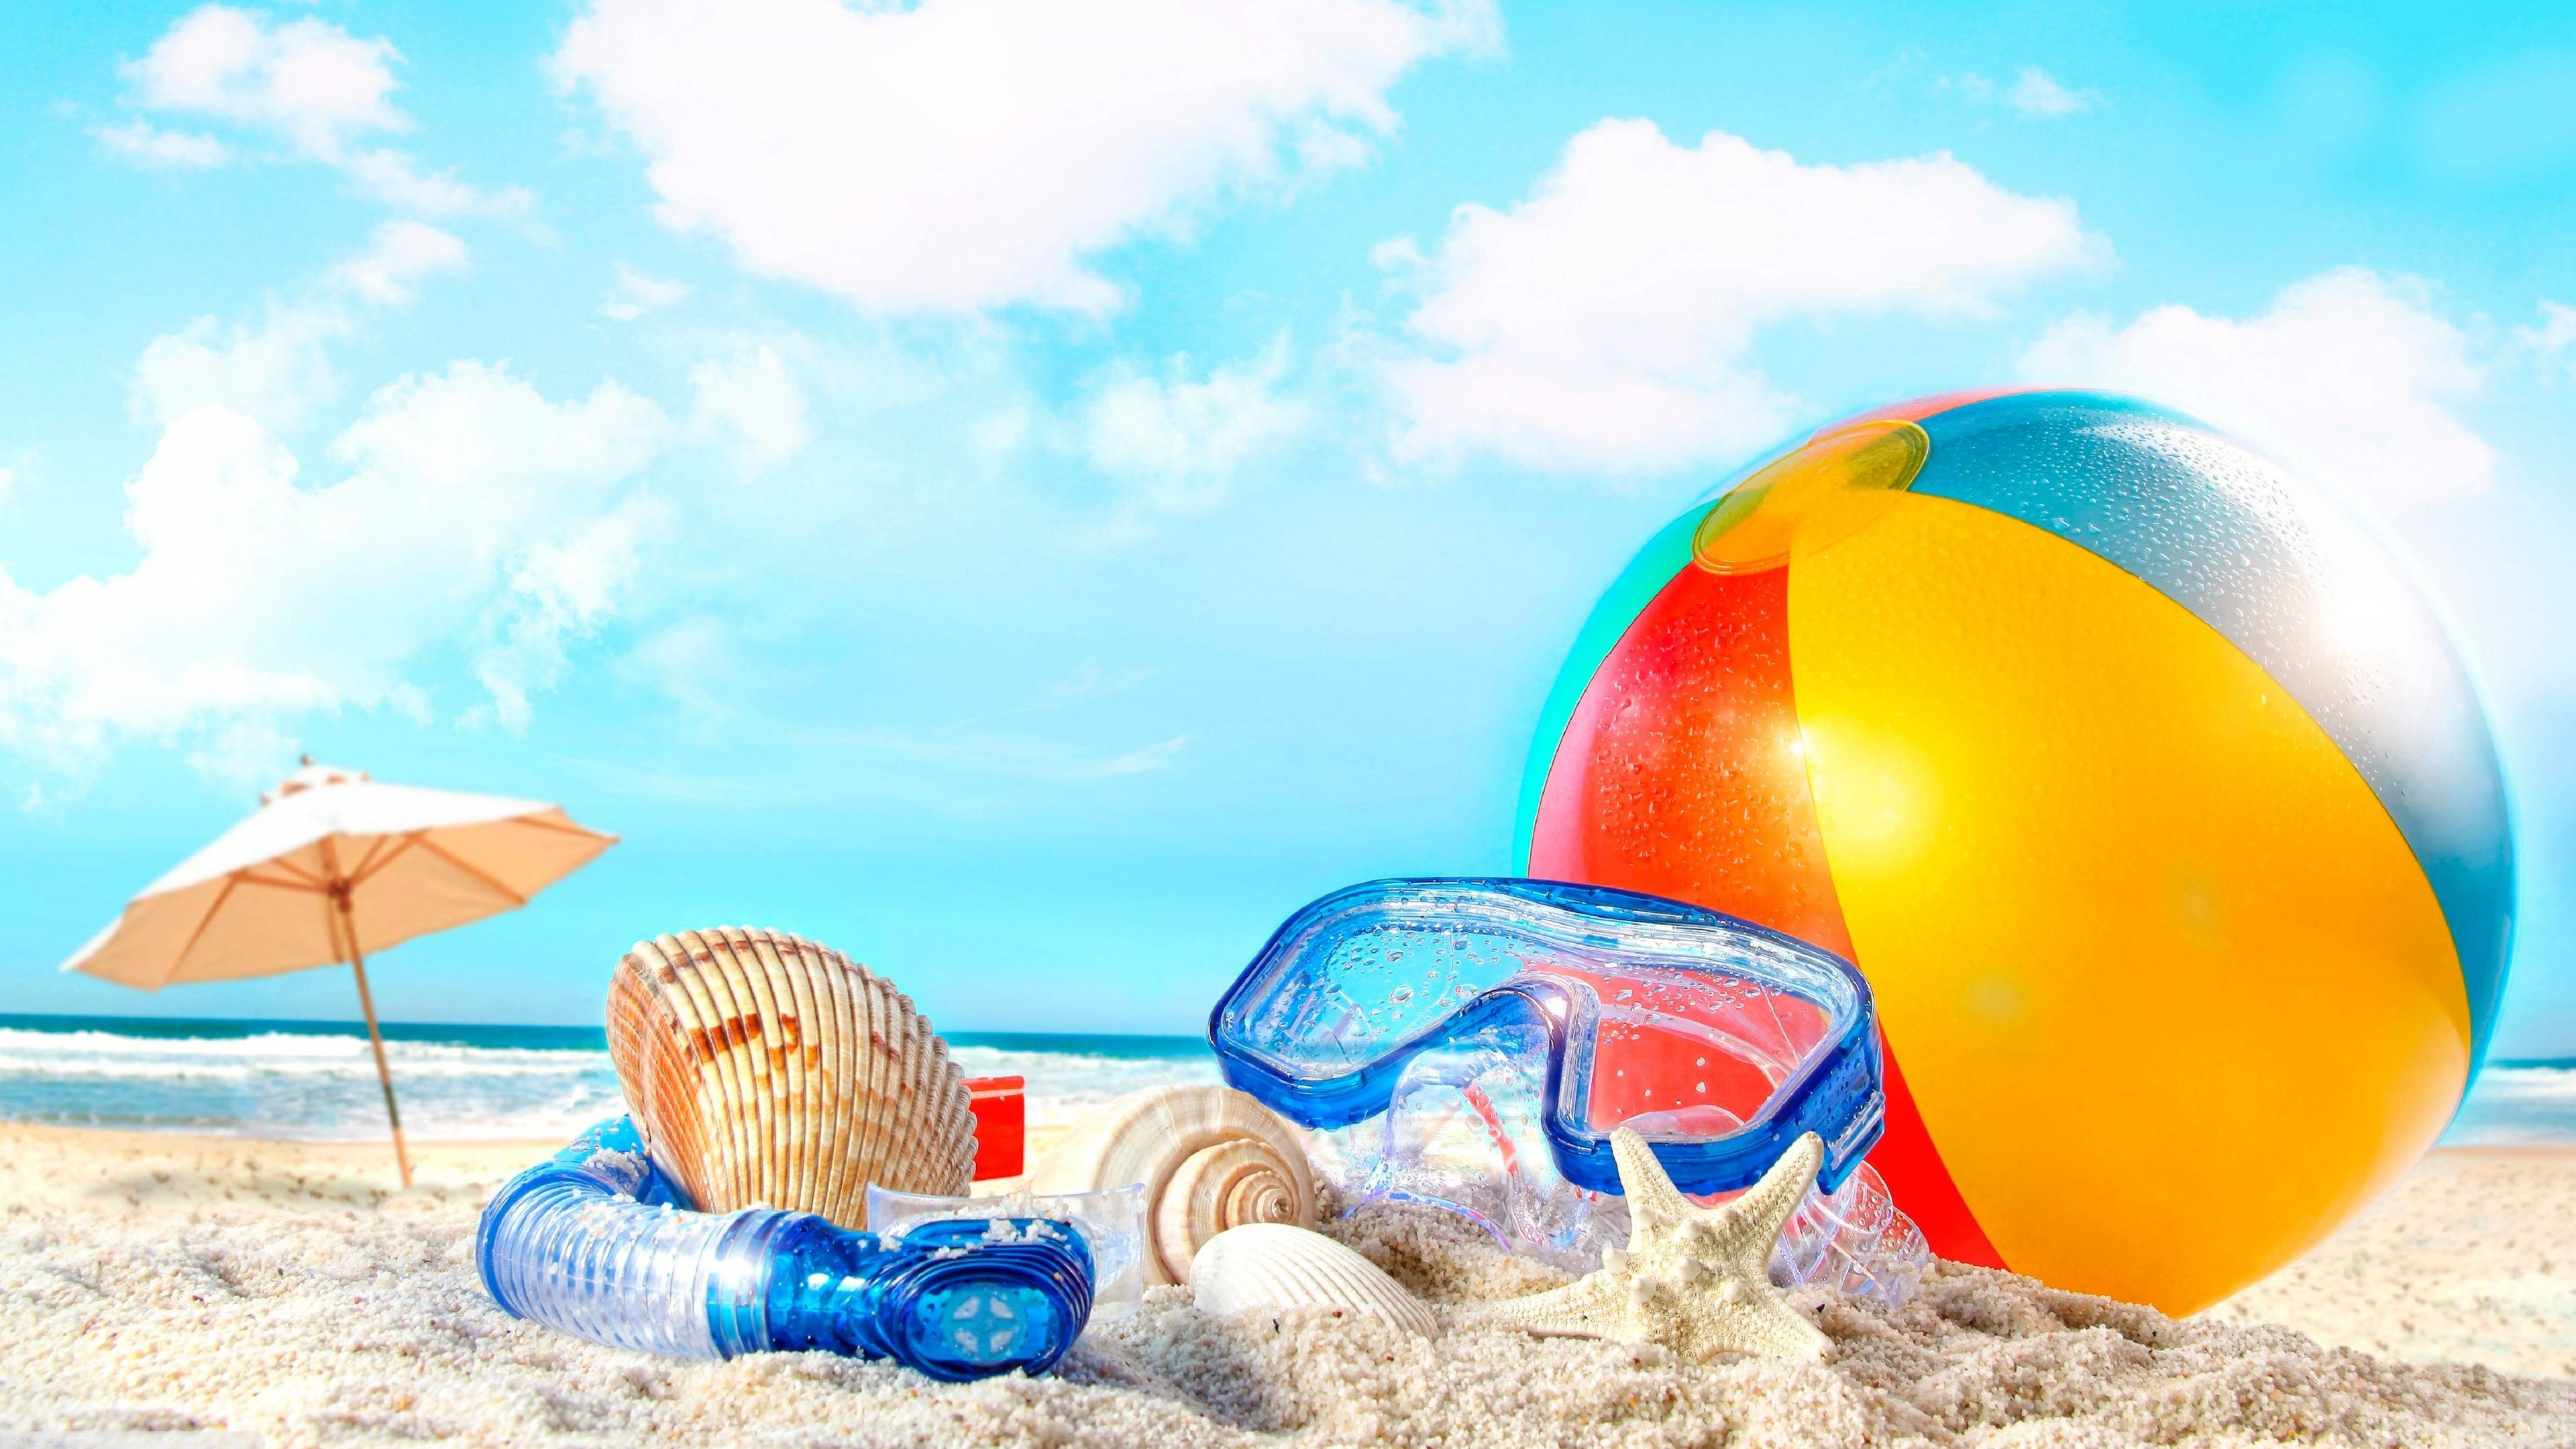 3840x2160 Summer Backgrounds Wallpapers - Wallpaper Cave